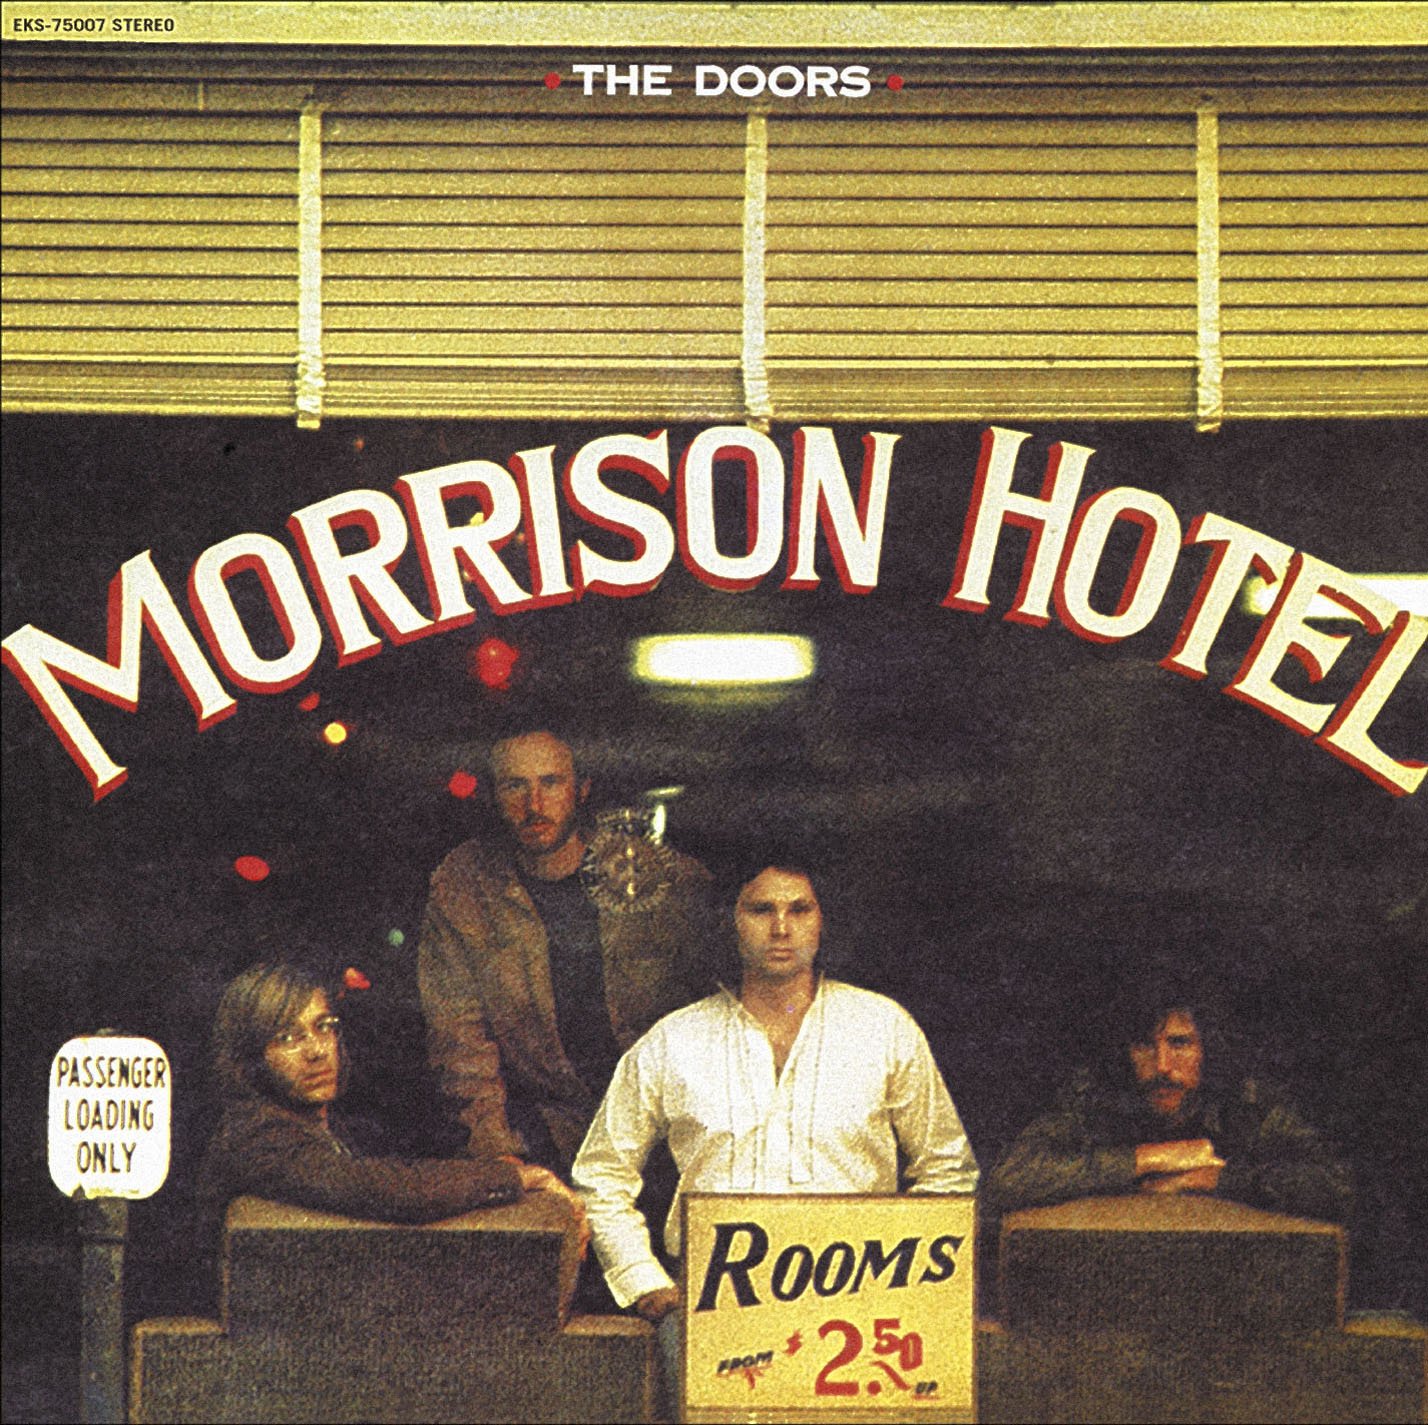 The Doors-Morrison Hotel-(7559-75007-2)-REISSUE REMASTERED-CD-FLAC-1991-WRE